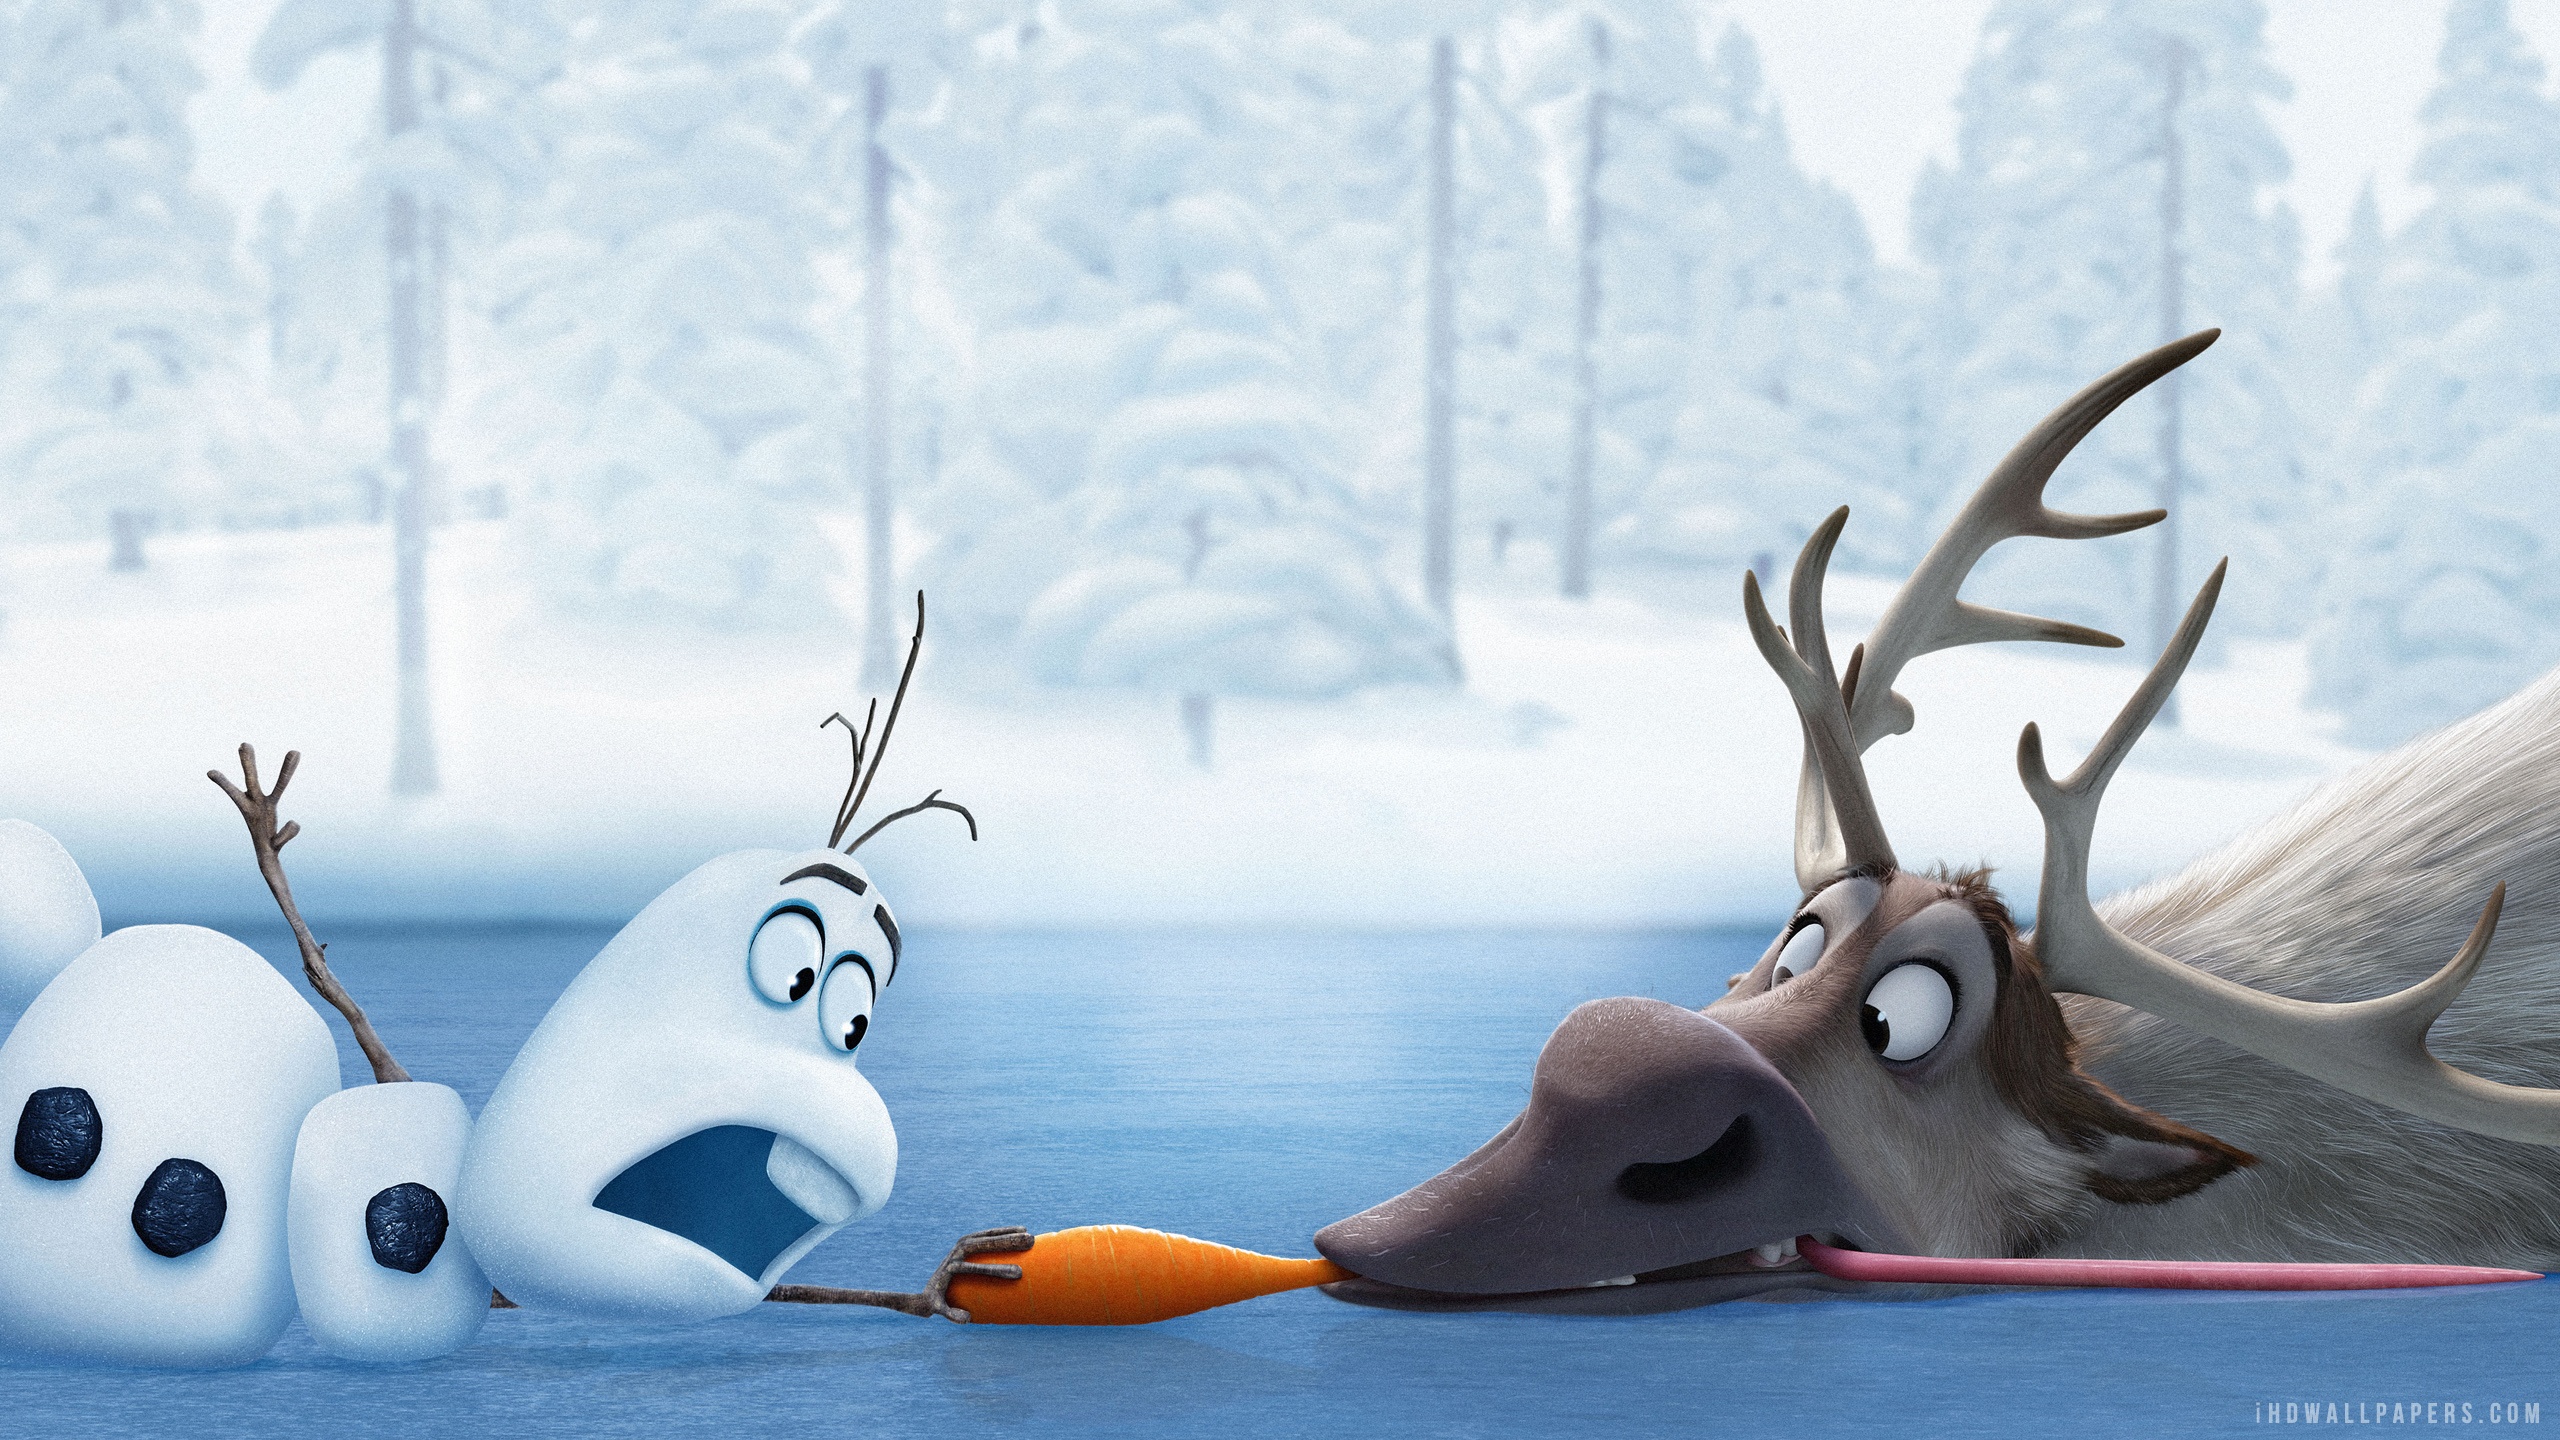 Olaf Presents Wallpapers